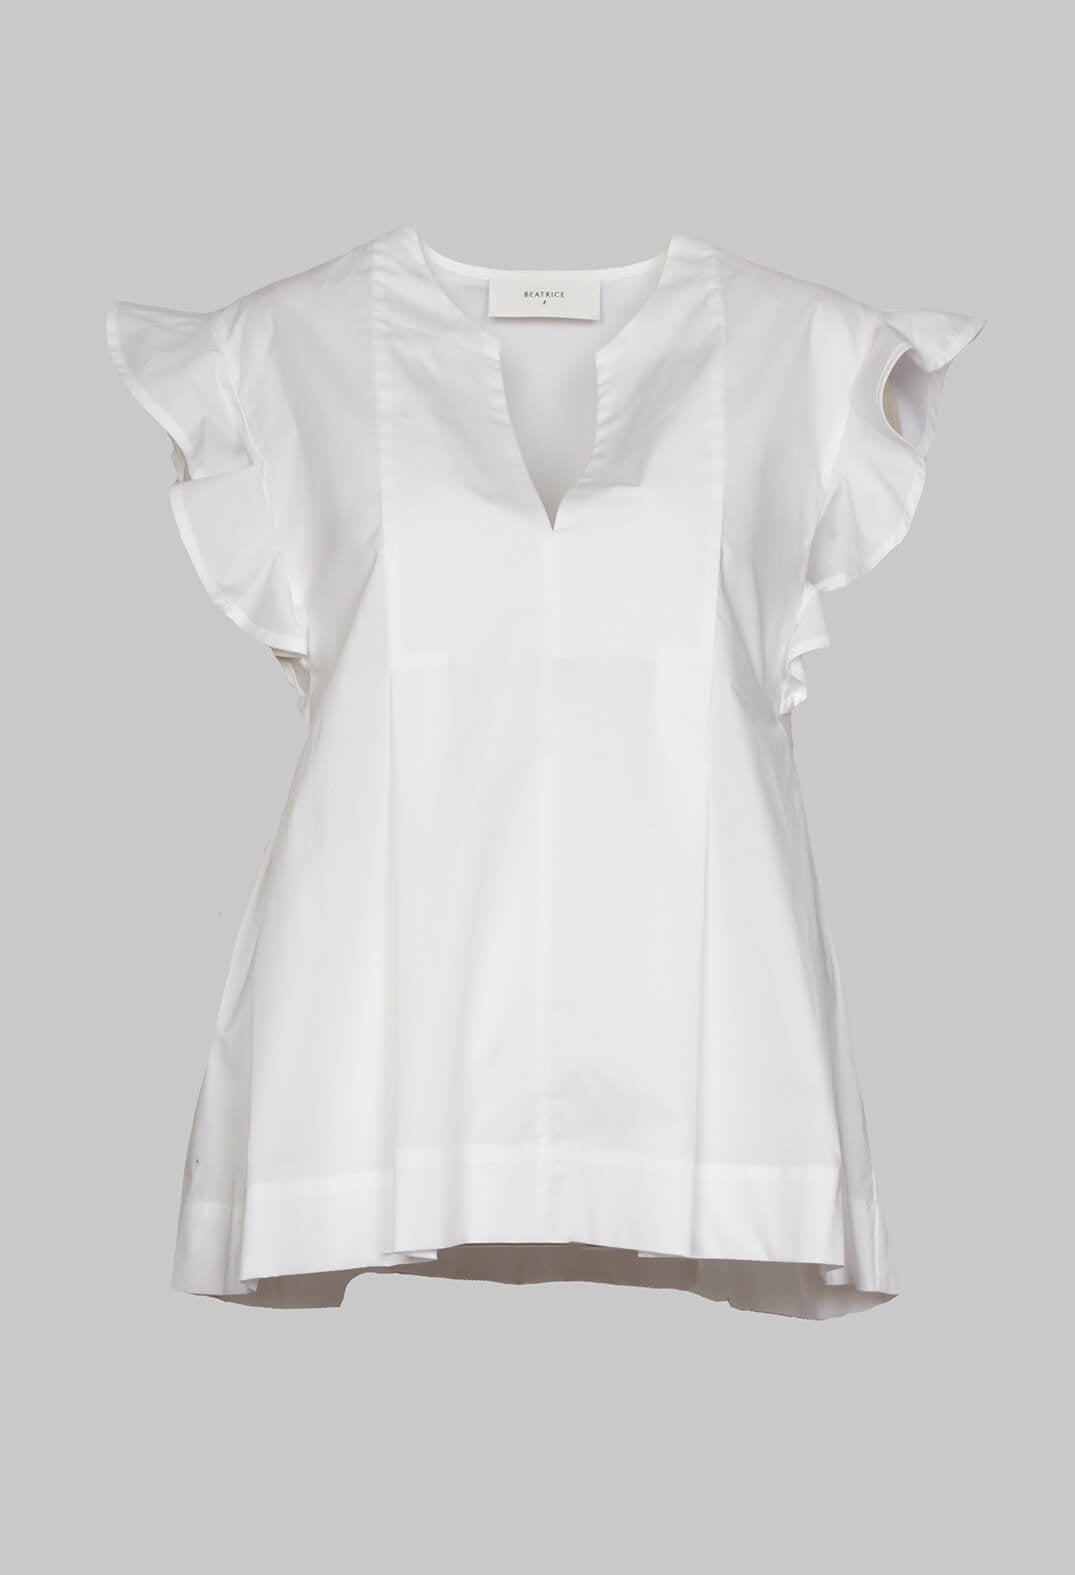 v neck shirt in white with flounce sleeves